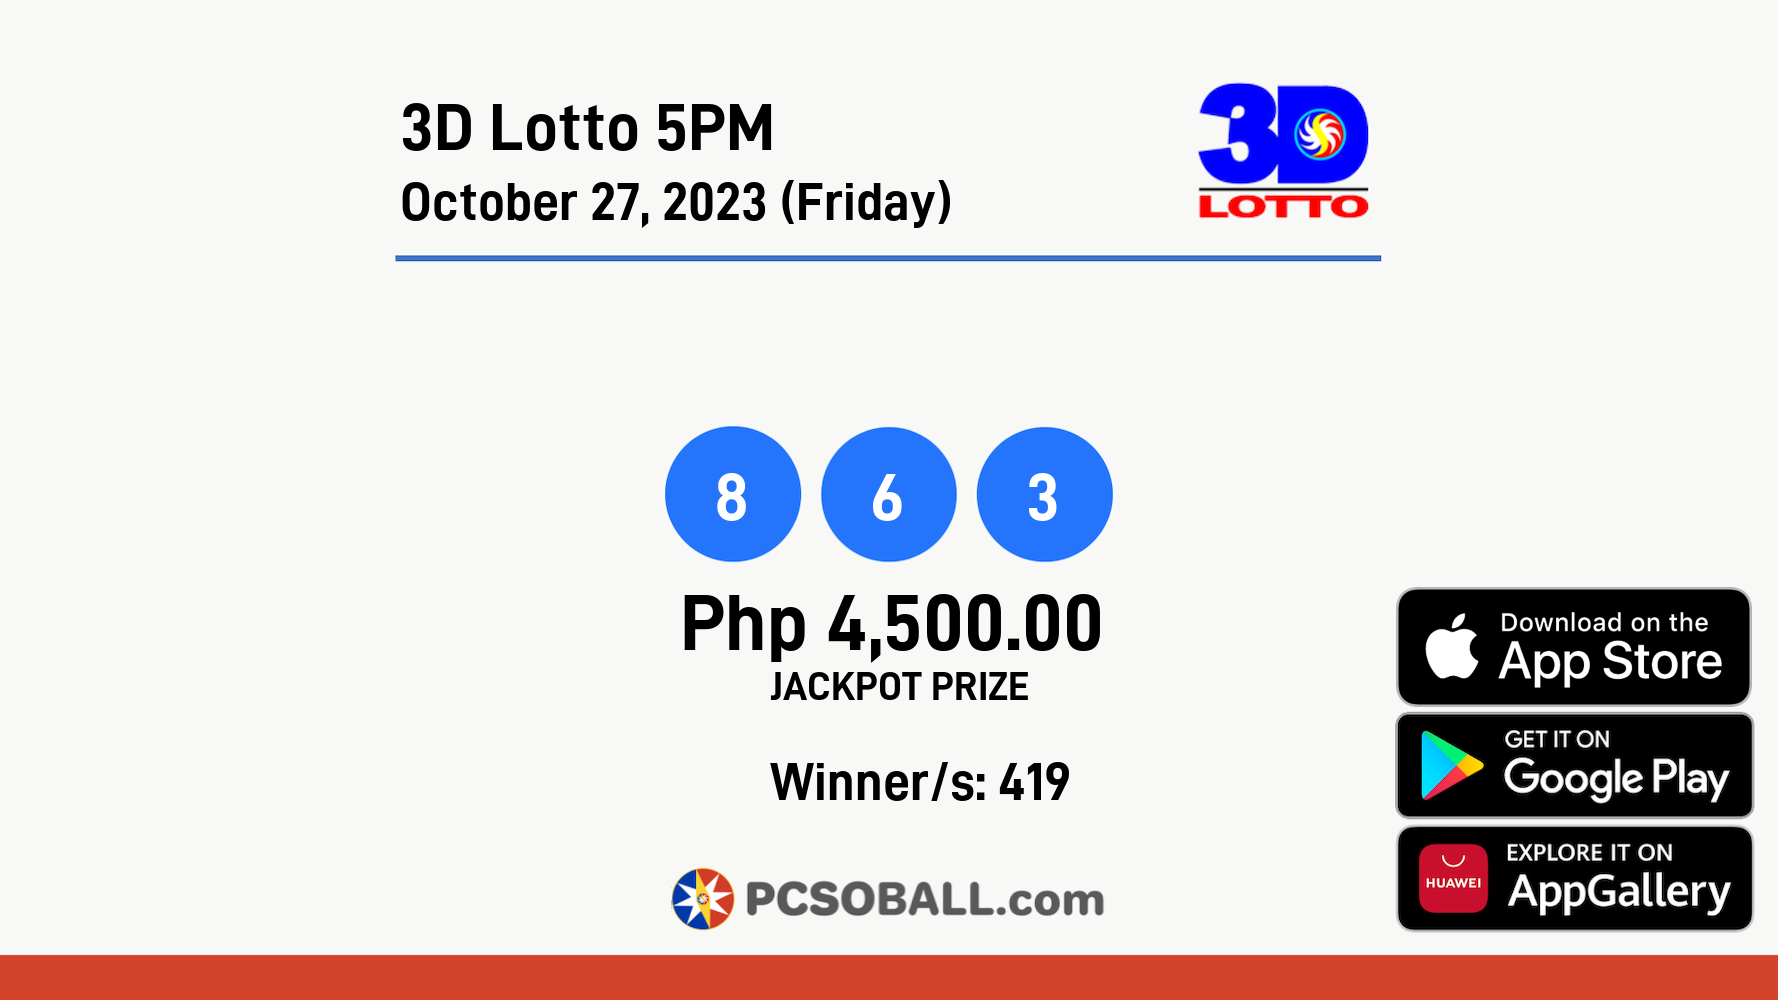 3D Lotto 5PM October 27, 2023 (Friday) Result